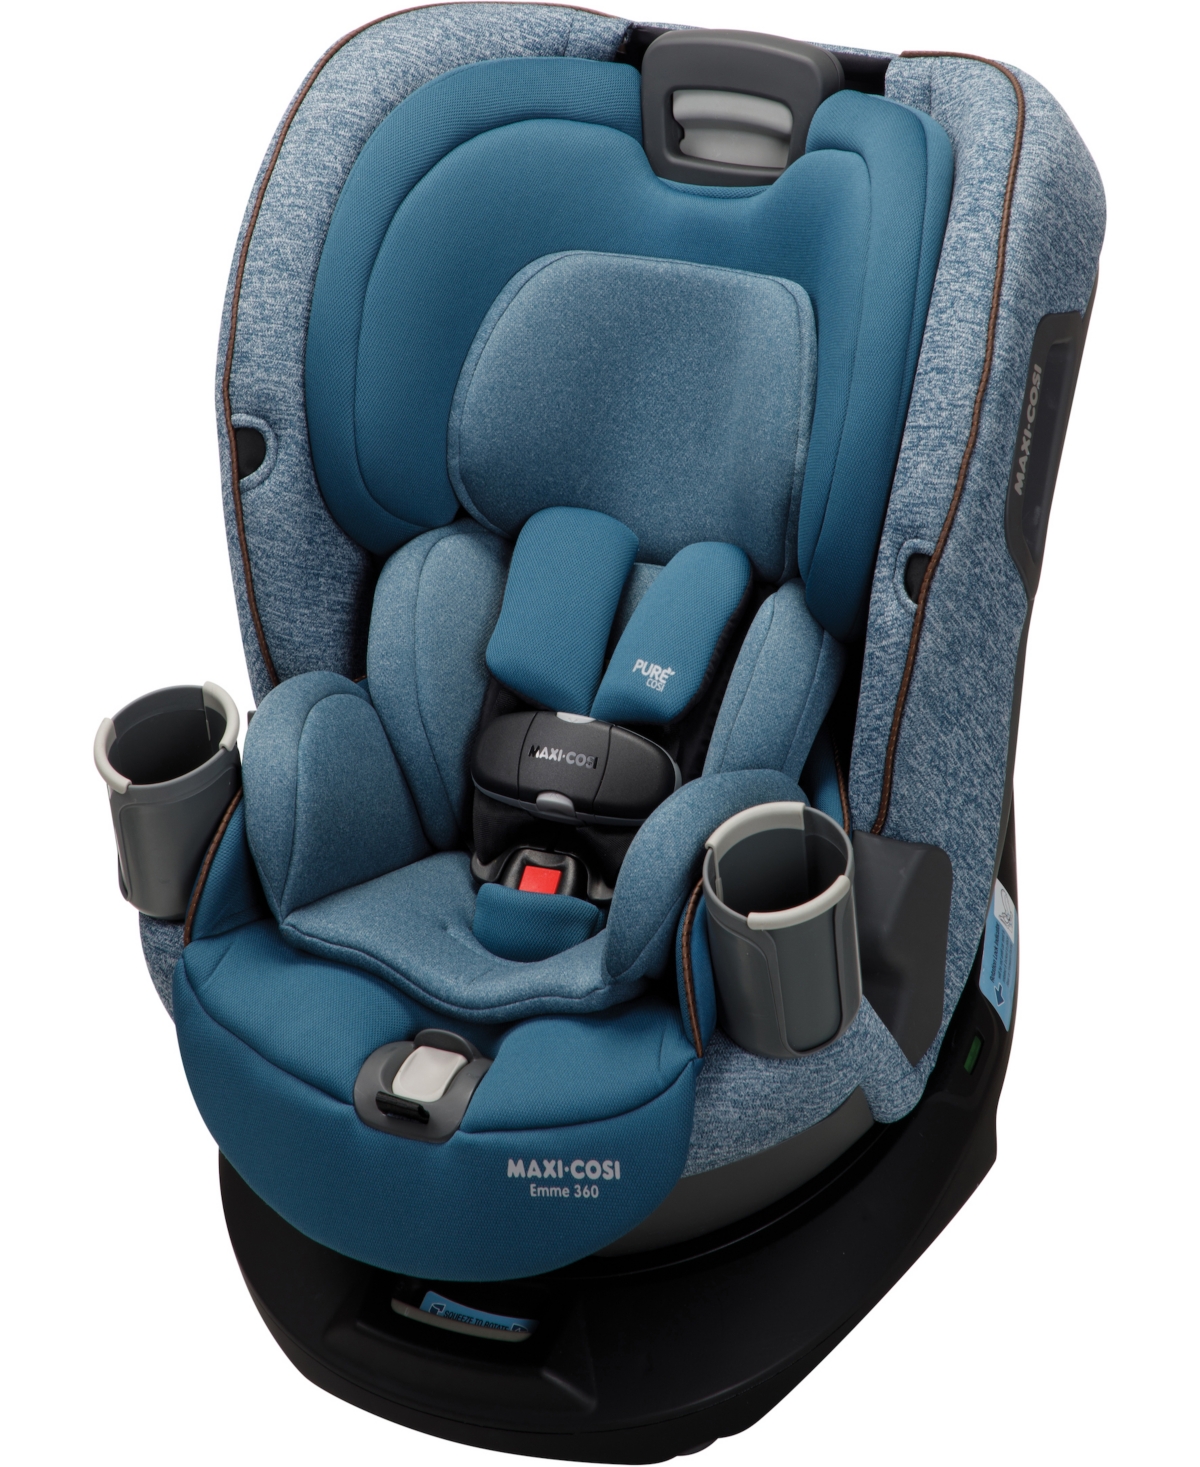 Maxi-cosi Baby Girls And Boys Emme Convertible Car Seat In Pacific Wonder